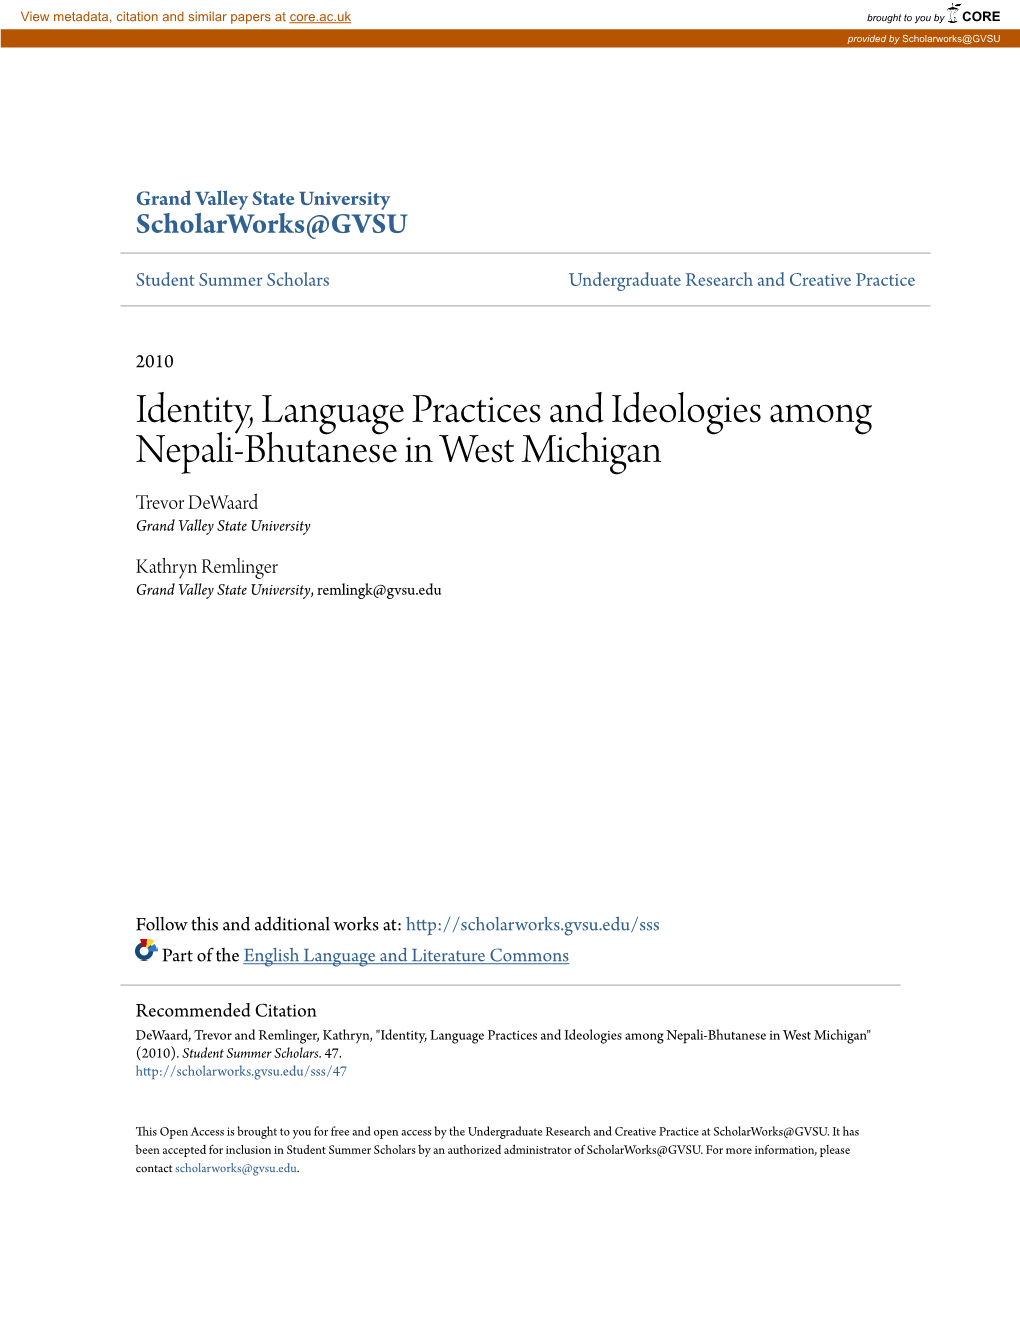 Identity, Language Practices and Ideologies Among Nepali-Bhutanese in West Michigan Trevor Dewaard Grand Valley State University